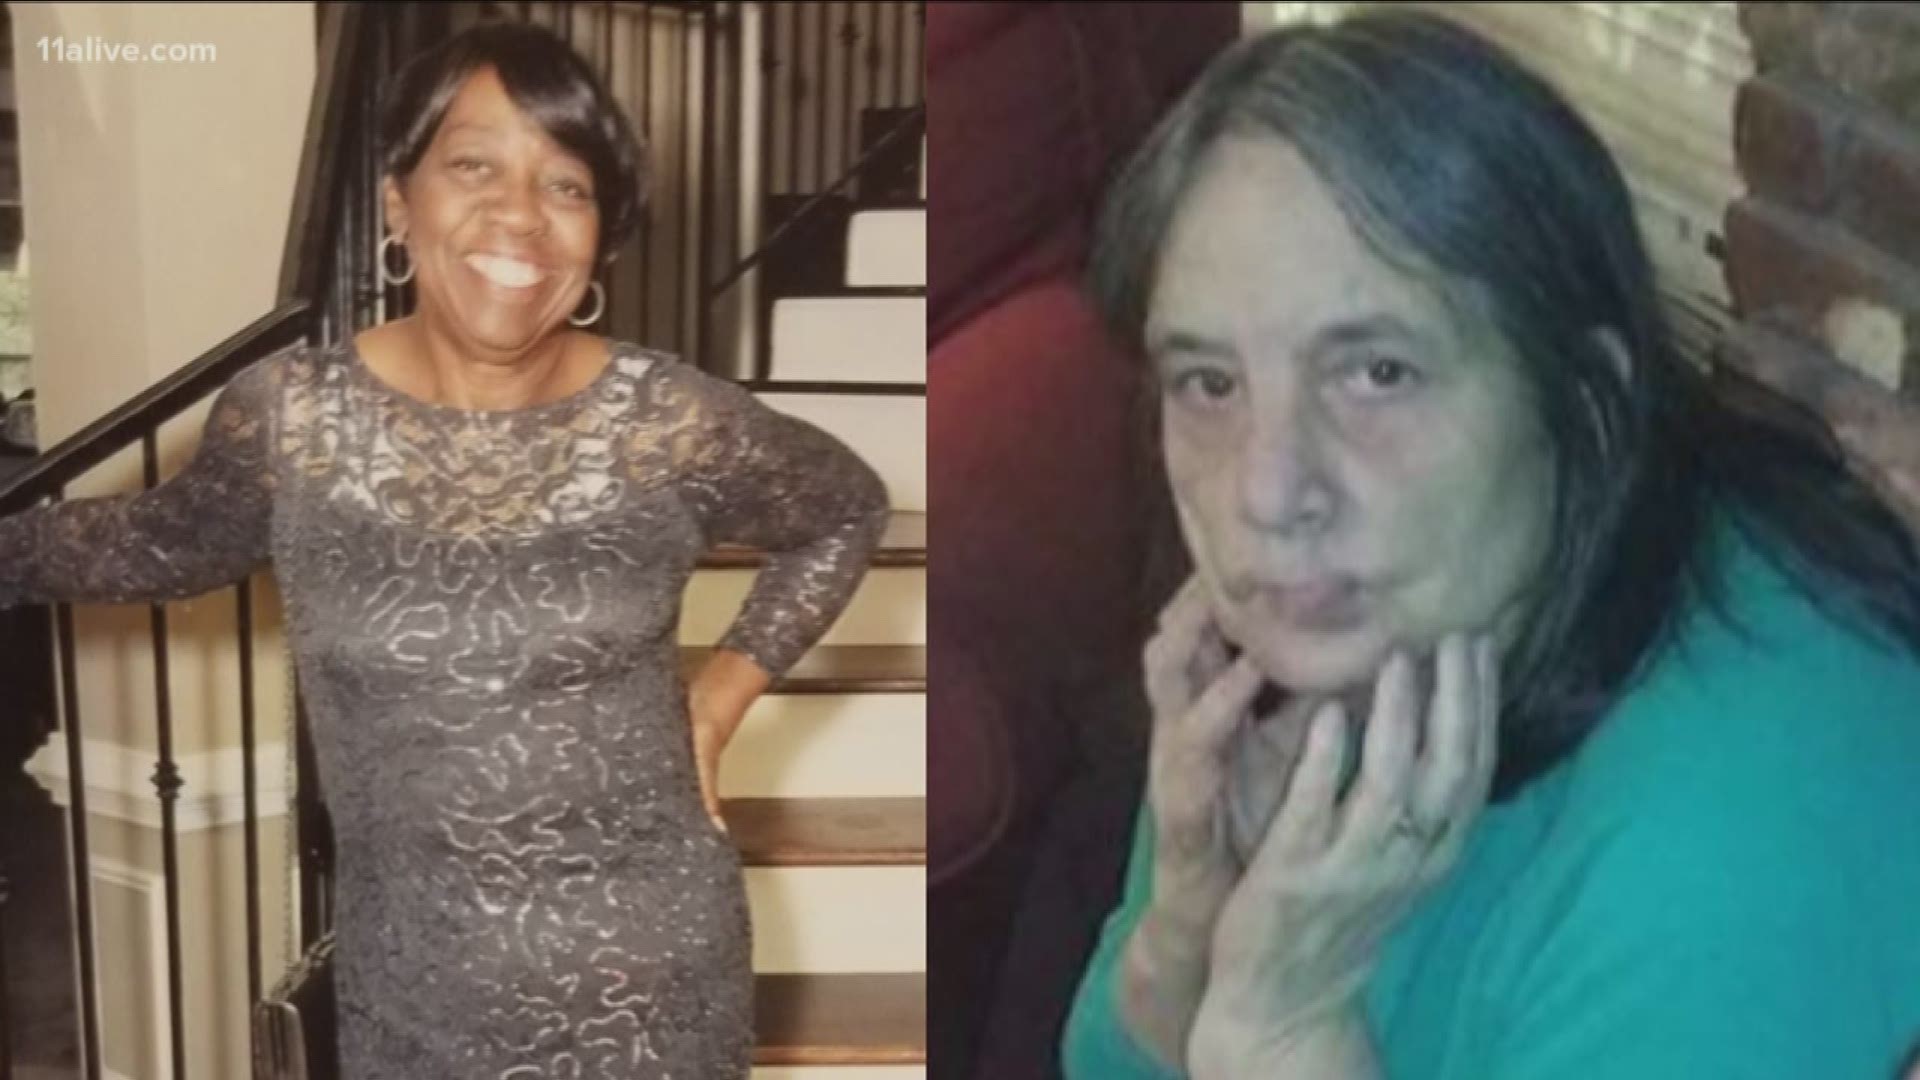 Officers said Maudine Phelps, 71, and Phoebe Jackson-Nemeth, 63, have been missing since March 5. Phelps is a black woman and Jackson-Nemeth is white.